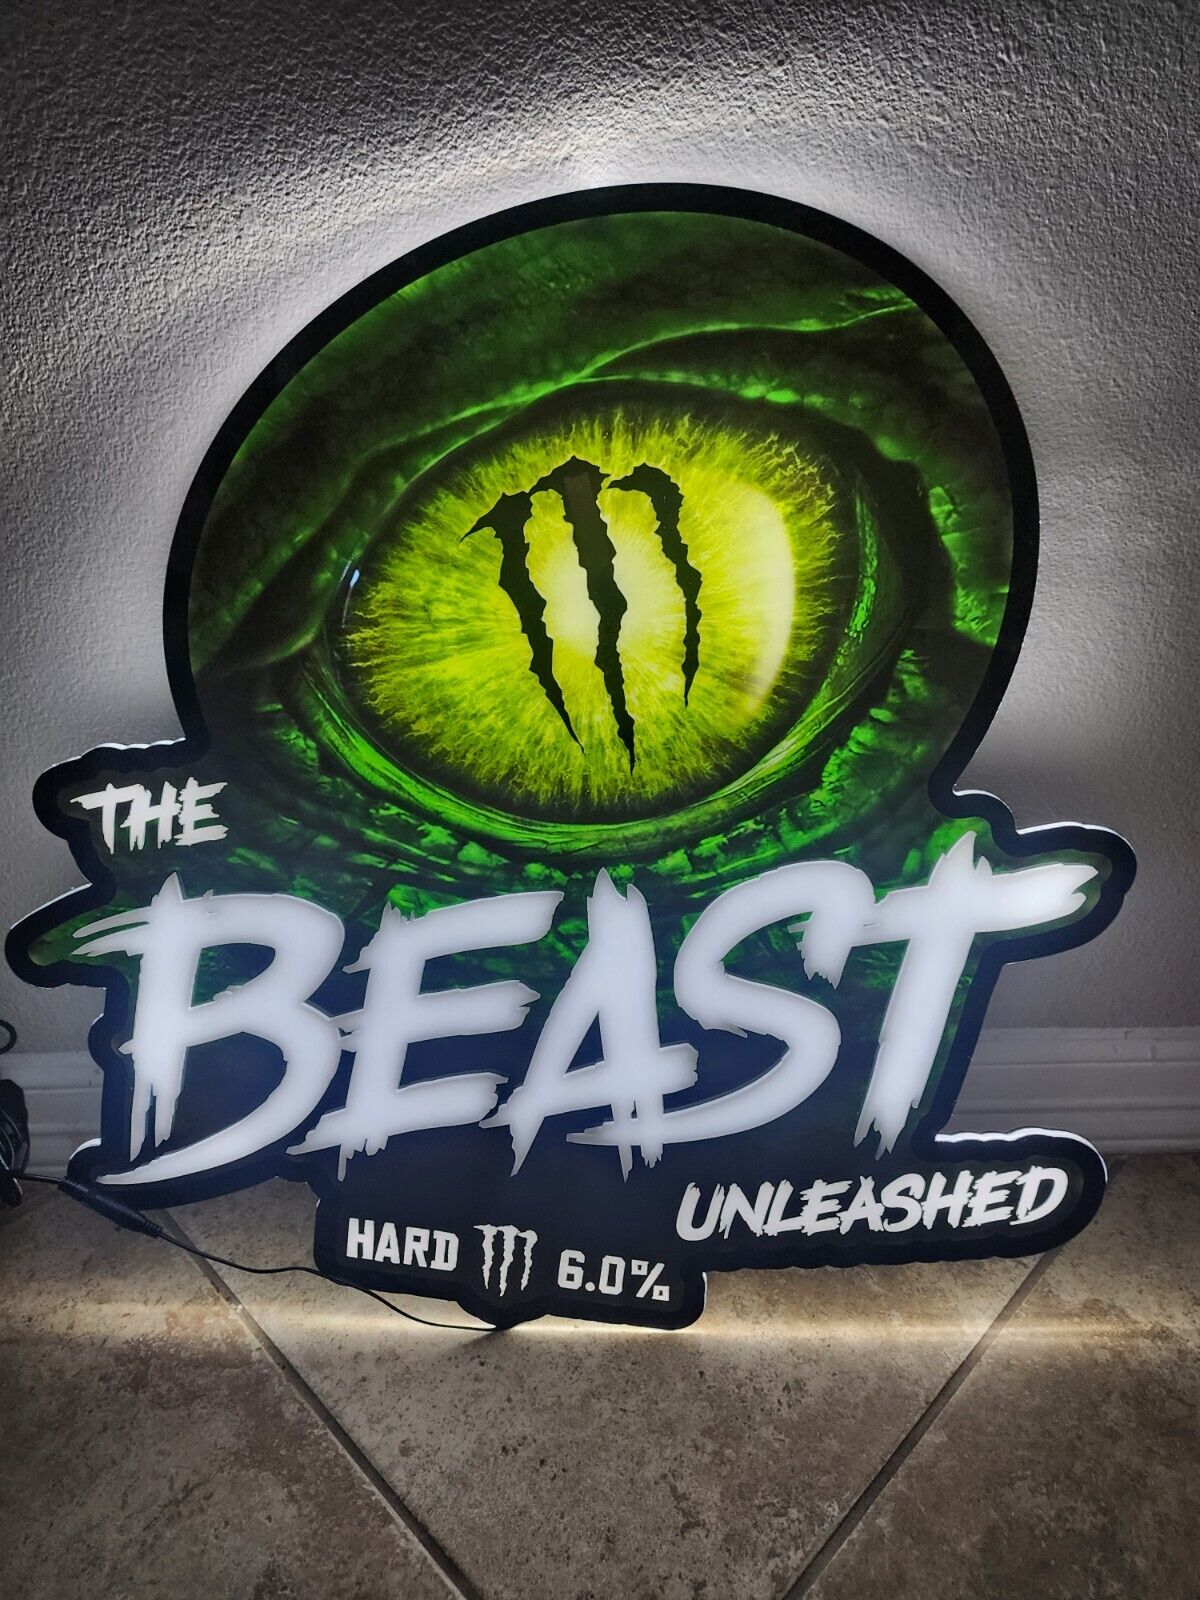 MONSTER THE BEAST UNLEASHED LED LIGHT.  BRAND NEW IN BOX